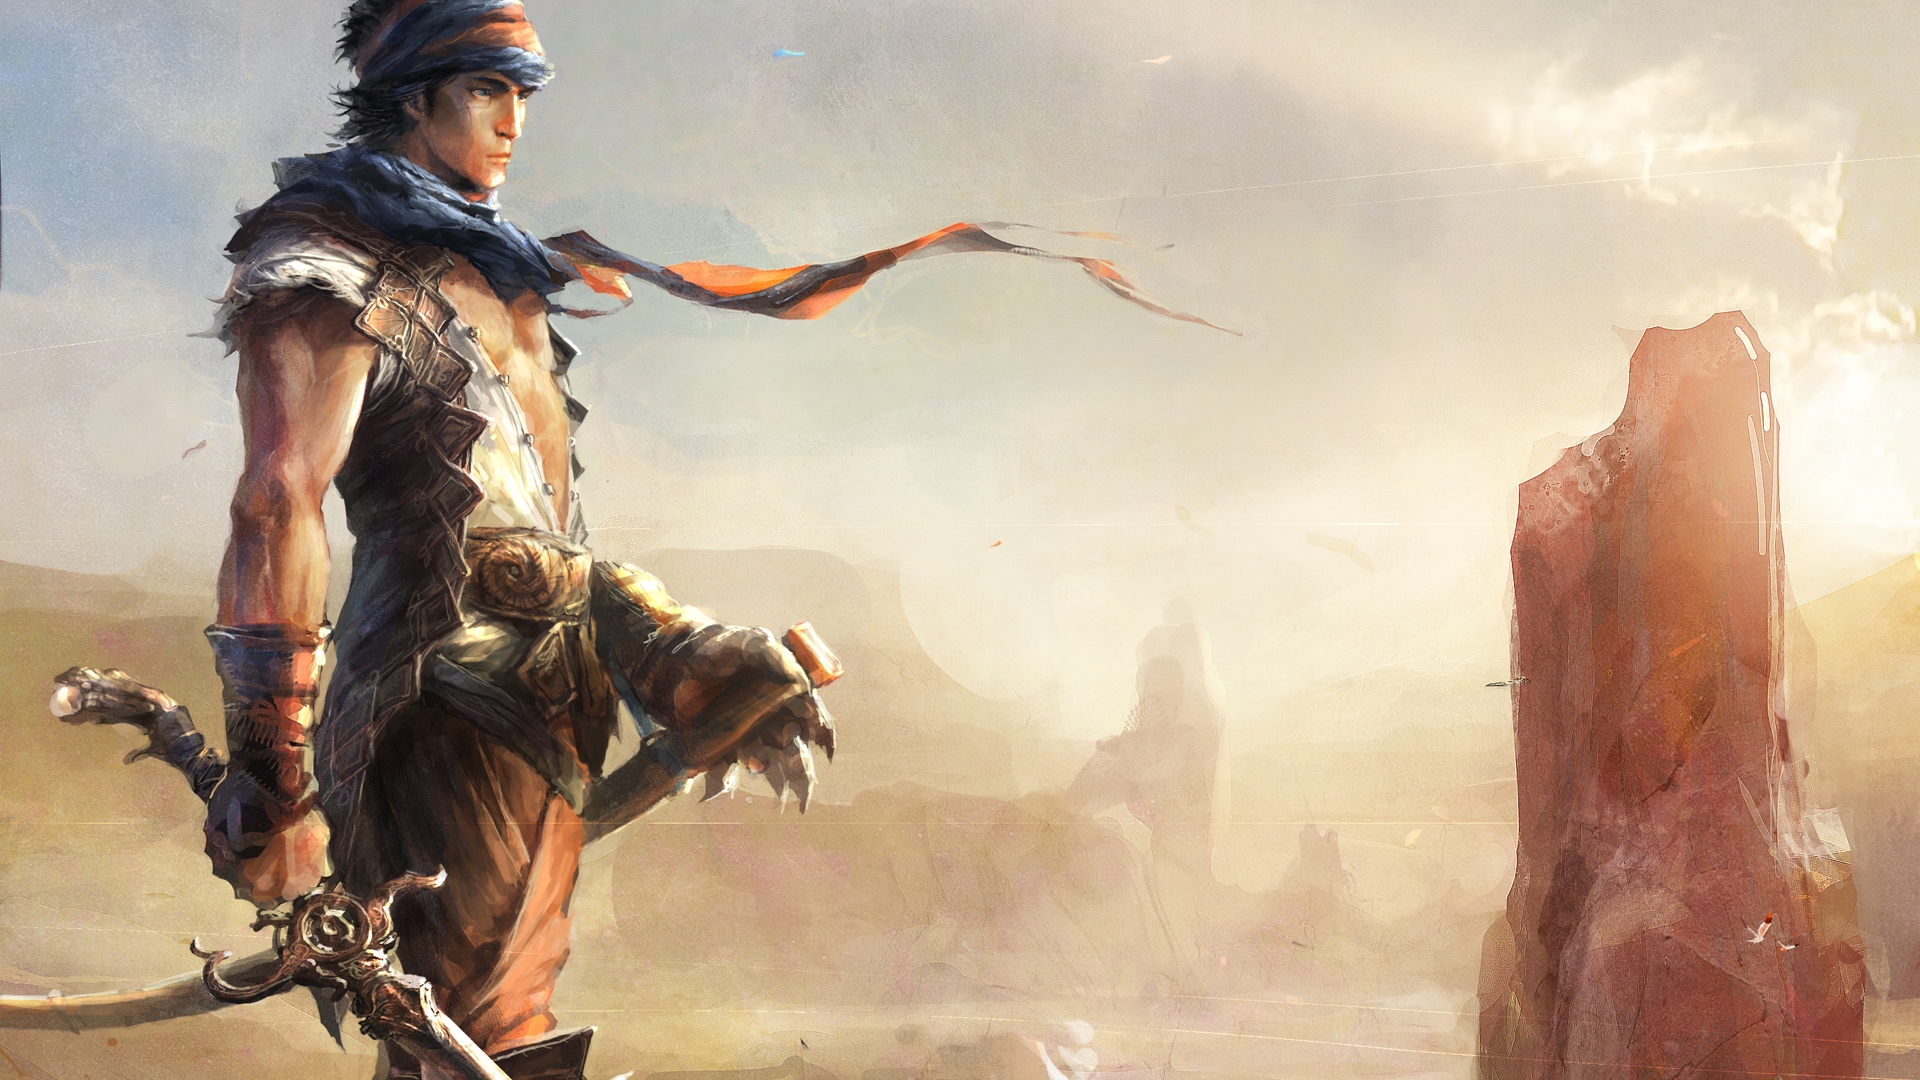 Video Game Prince Of Persia HD Wallpaper | Background Image